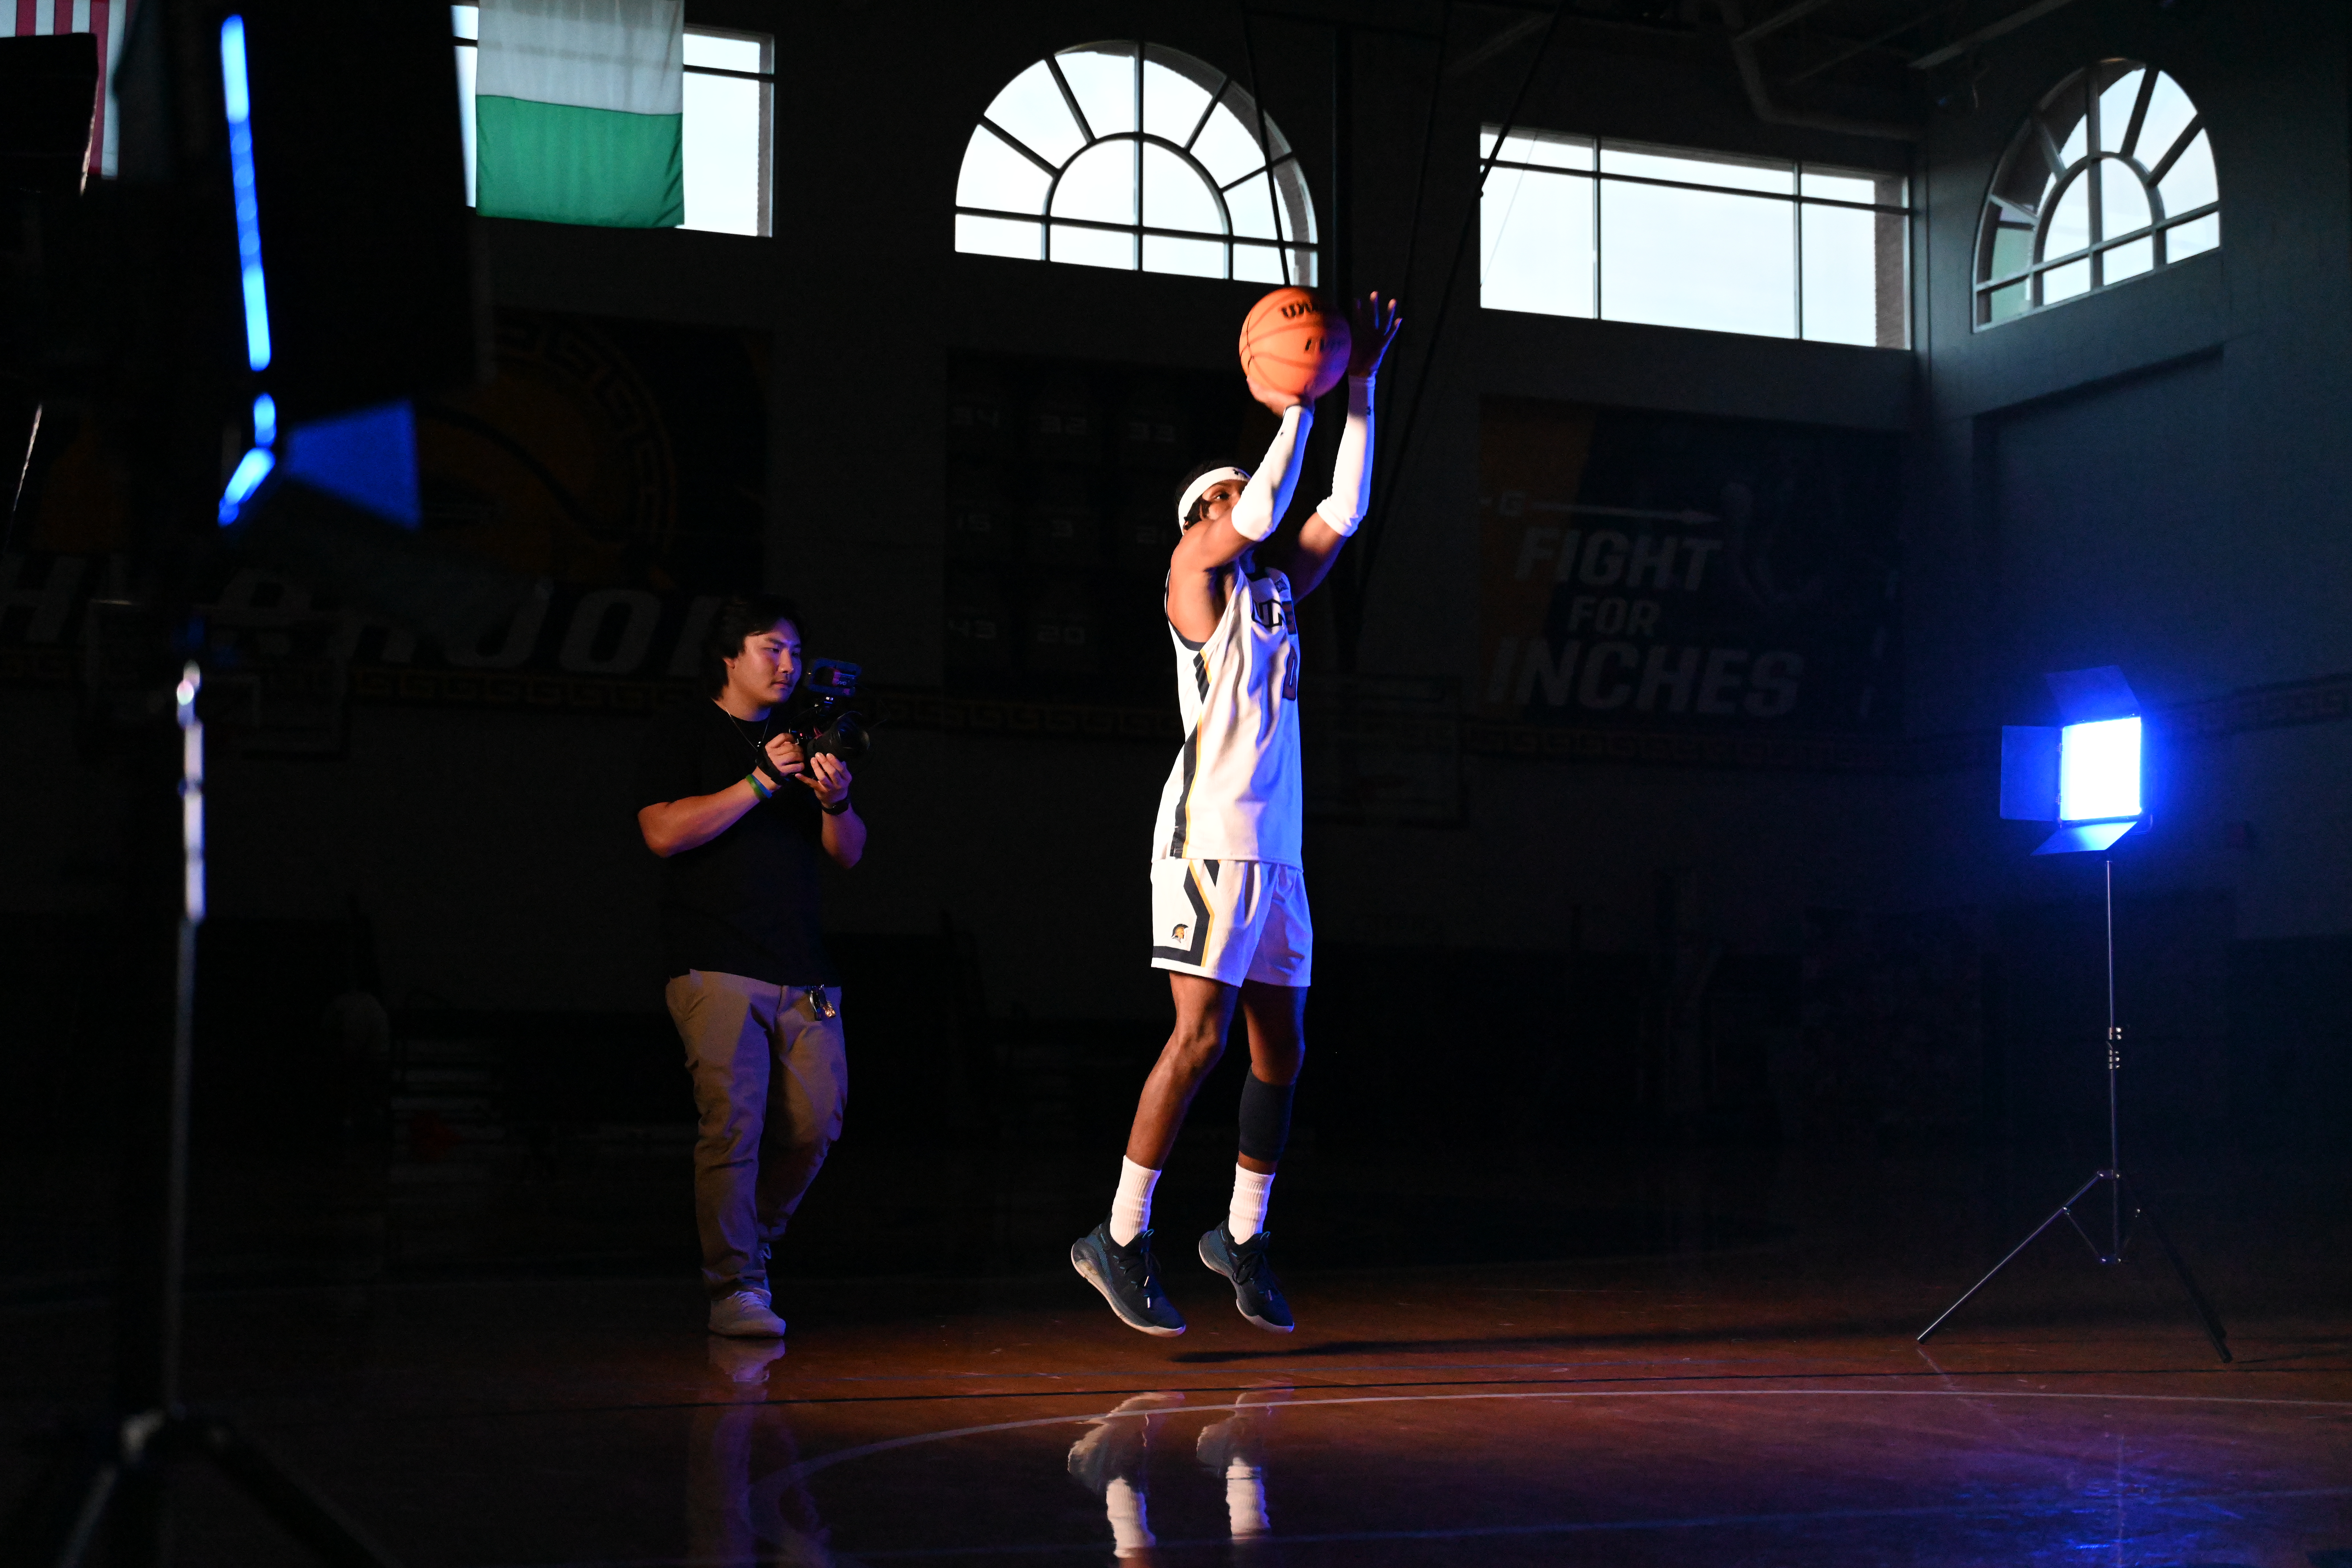 A media studies student stands behind a large camera taking video of basketball player who poses with a basketball for the team's intro video.